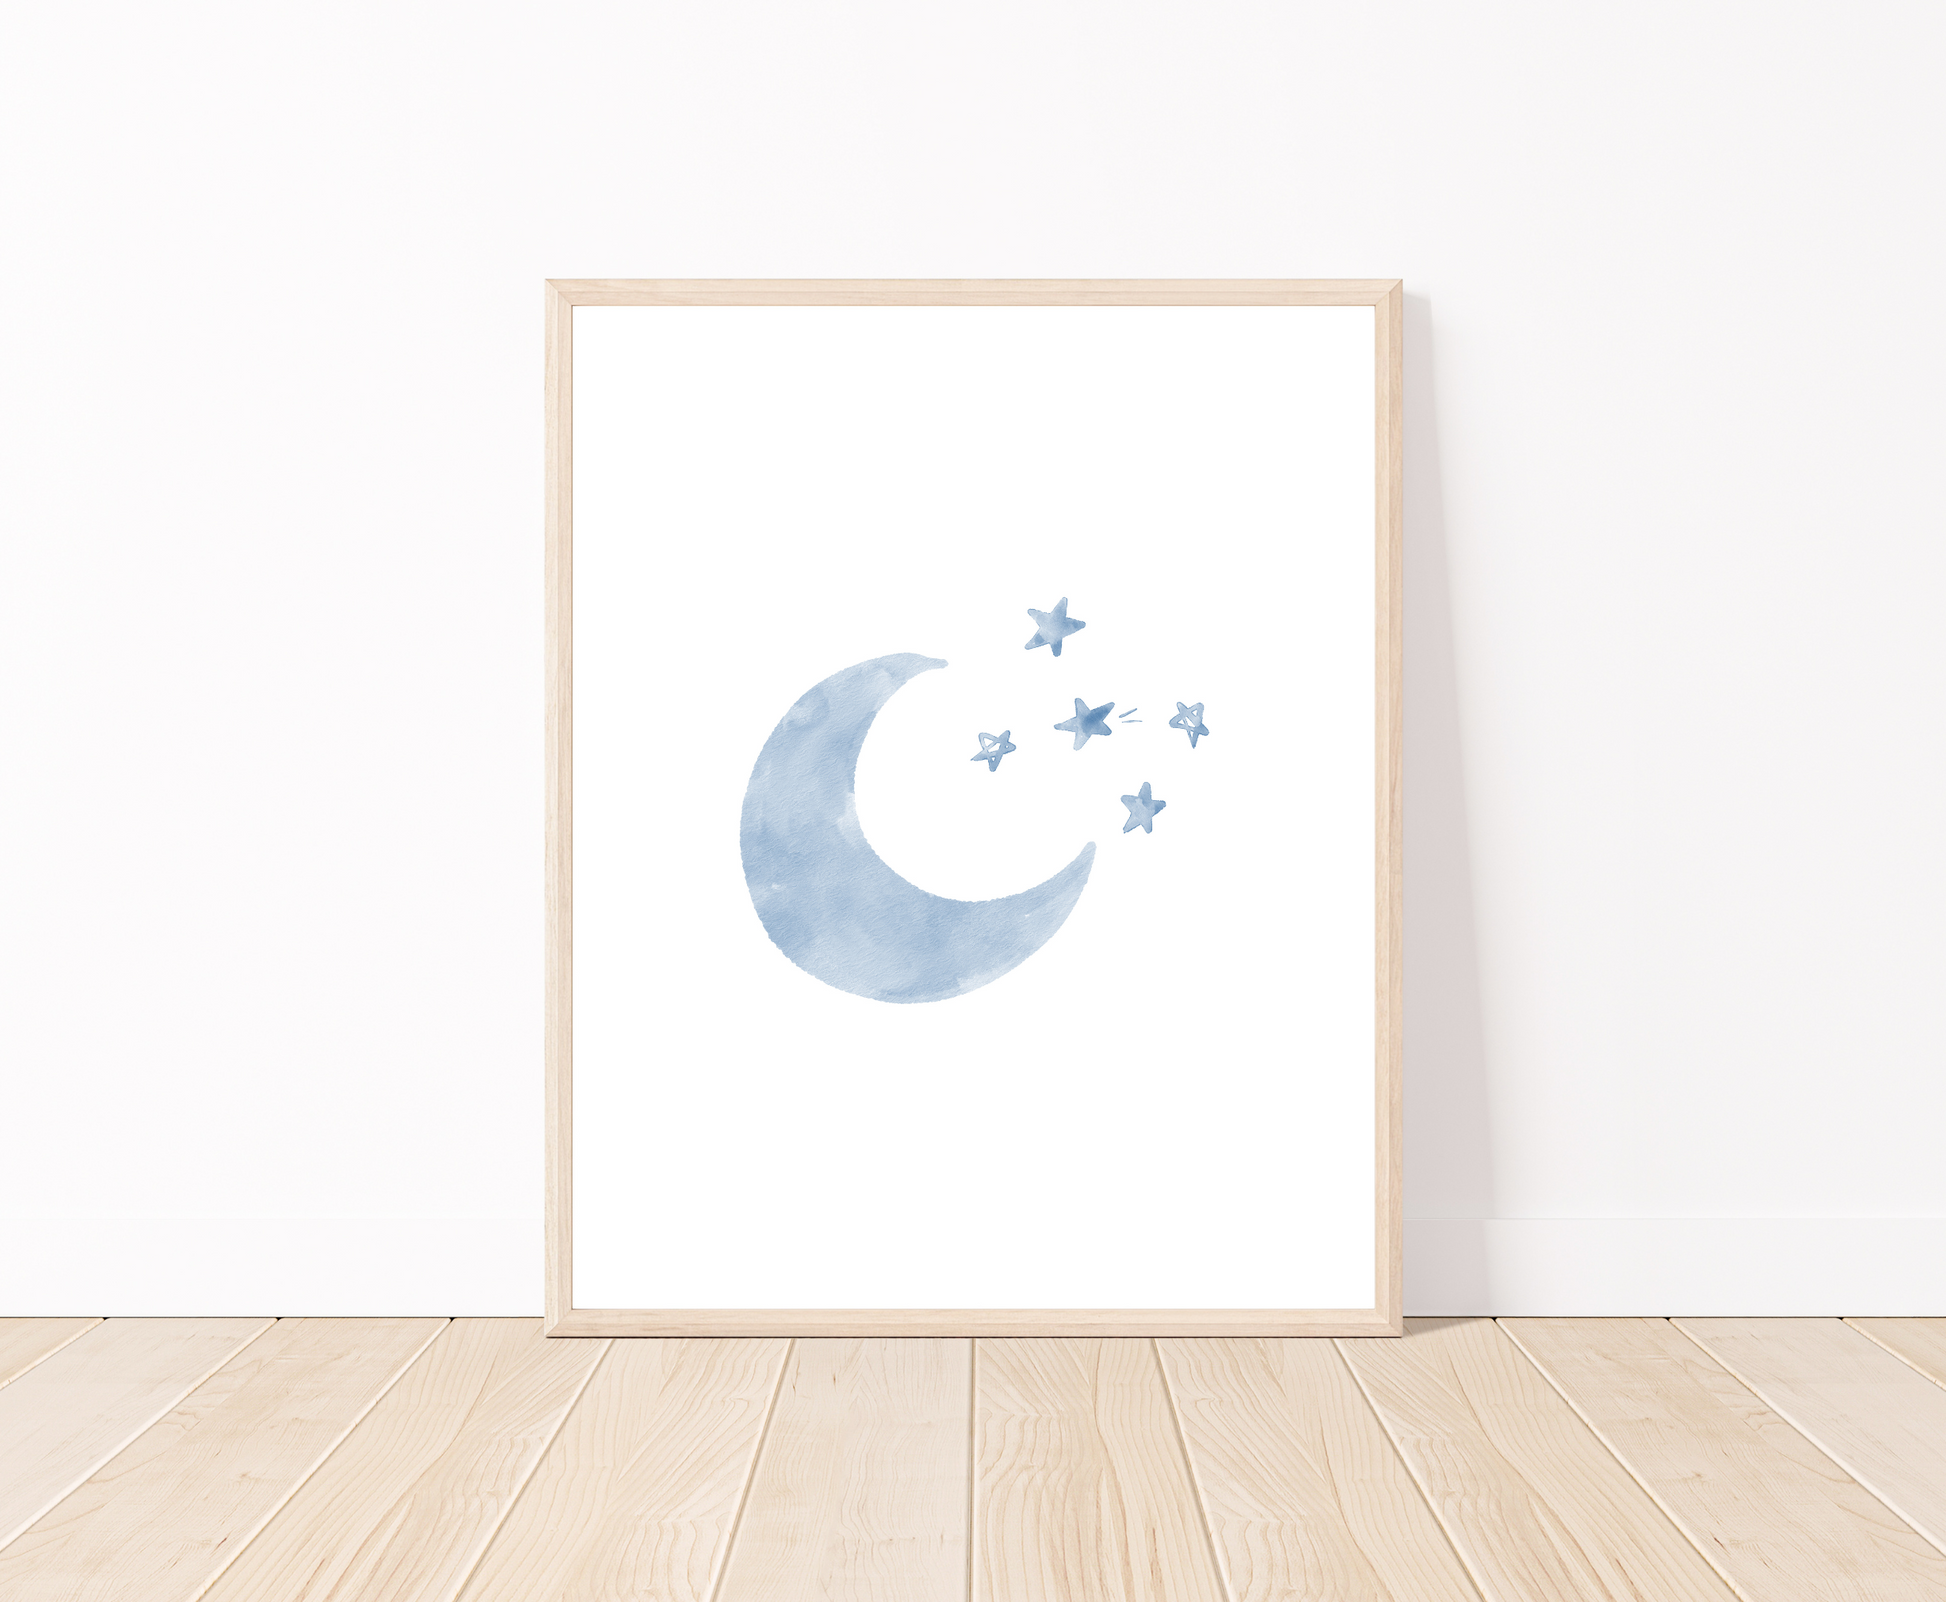 A digital poster is placed on a white wall and parquet flooring and shows a baby blue crescent and some tiny stars.